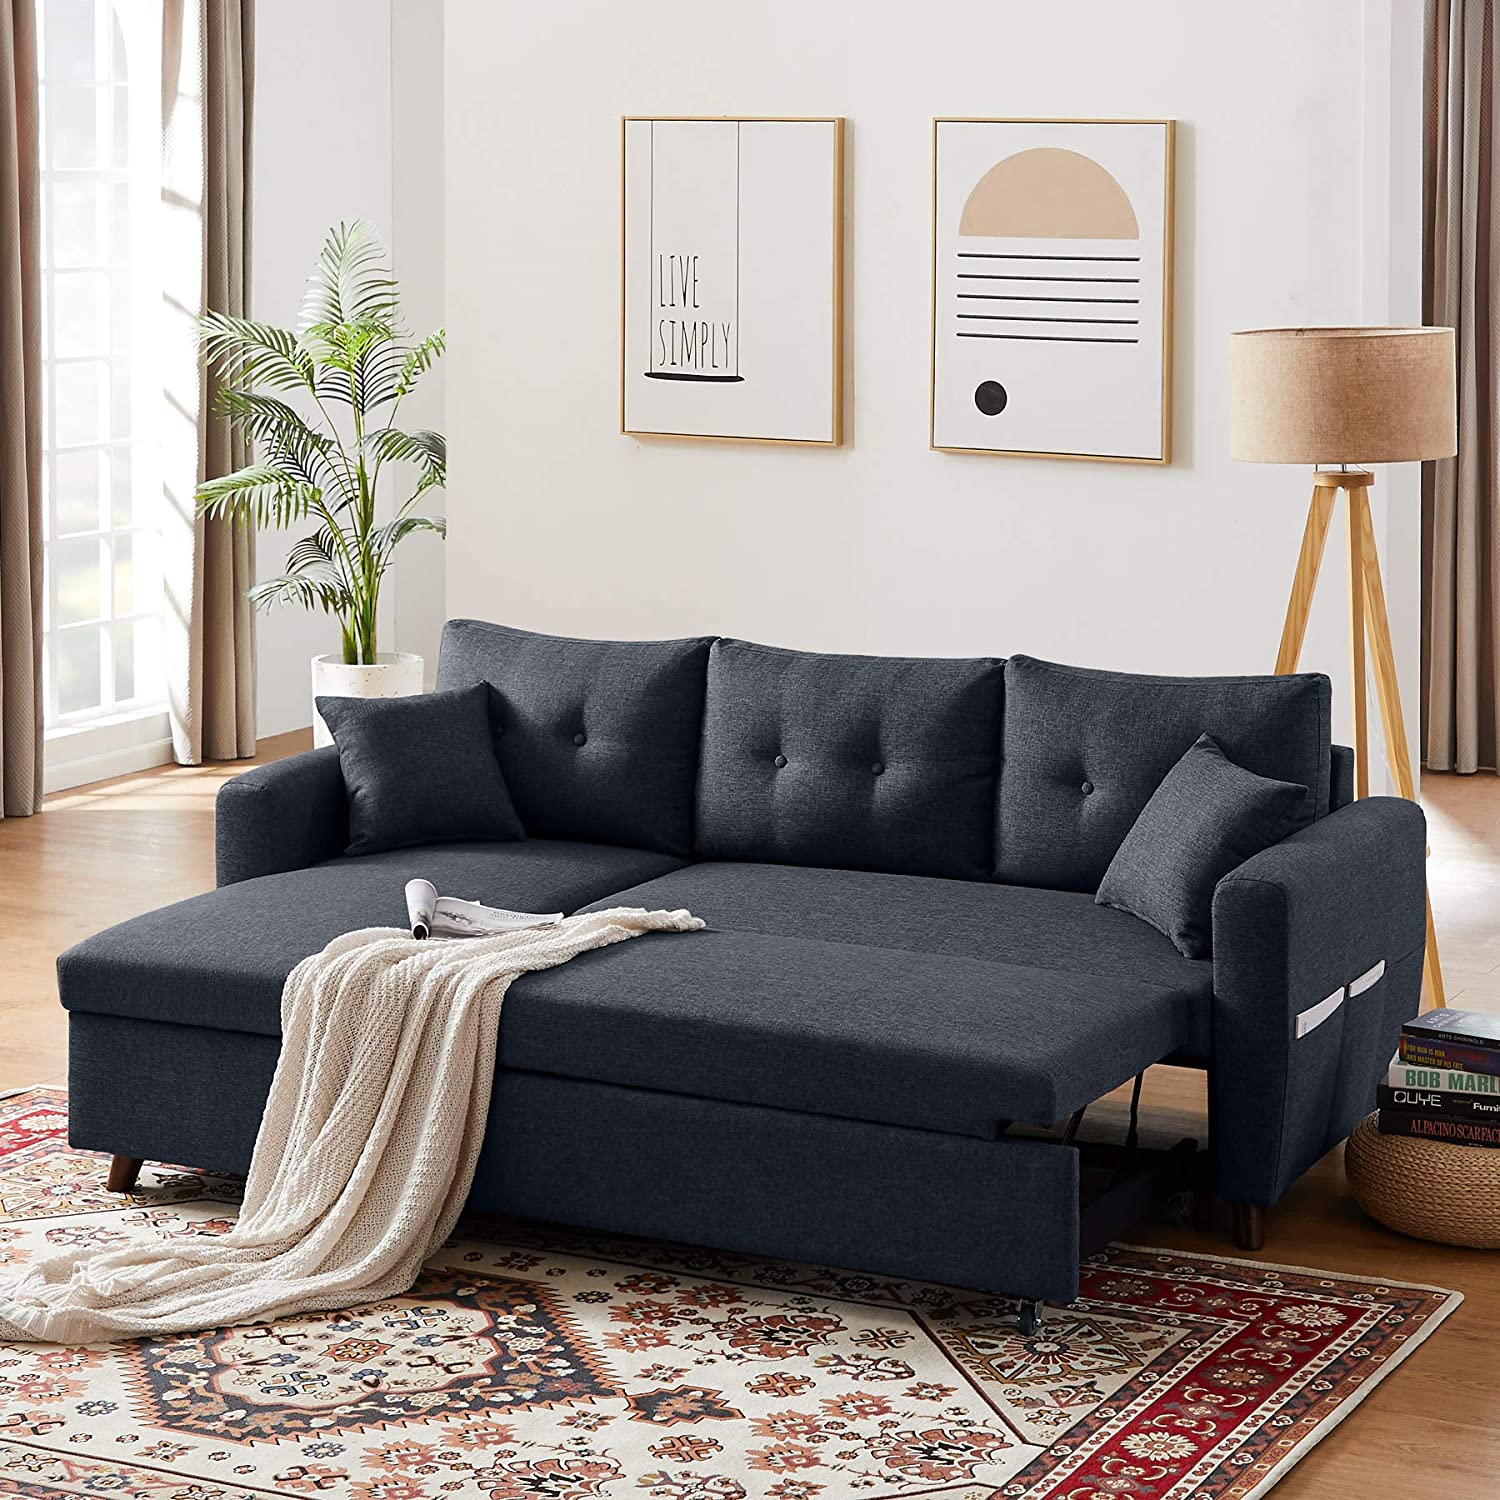 Modern Sectional L-Shaped Sofa Couch Bed w//Chaise 4-seat Linen Fabric Convertible Sofa Suitable for Living Room//Limited Spaces Gray Reversible Couch Sleeper w//Pull Out Bed /& Storage Space